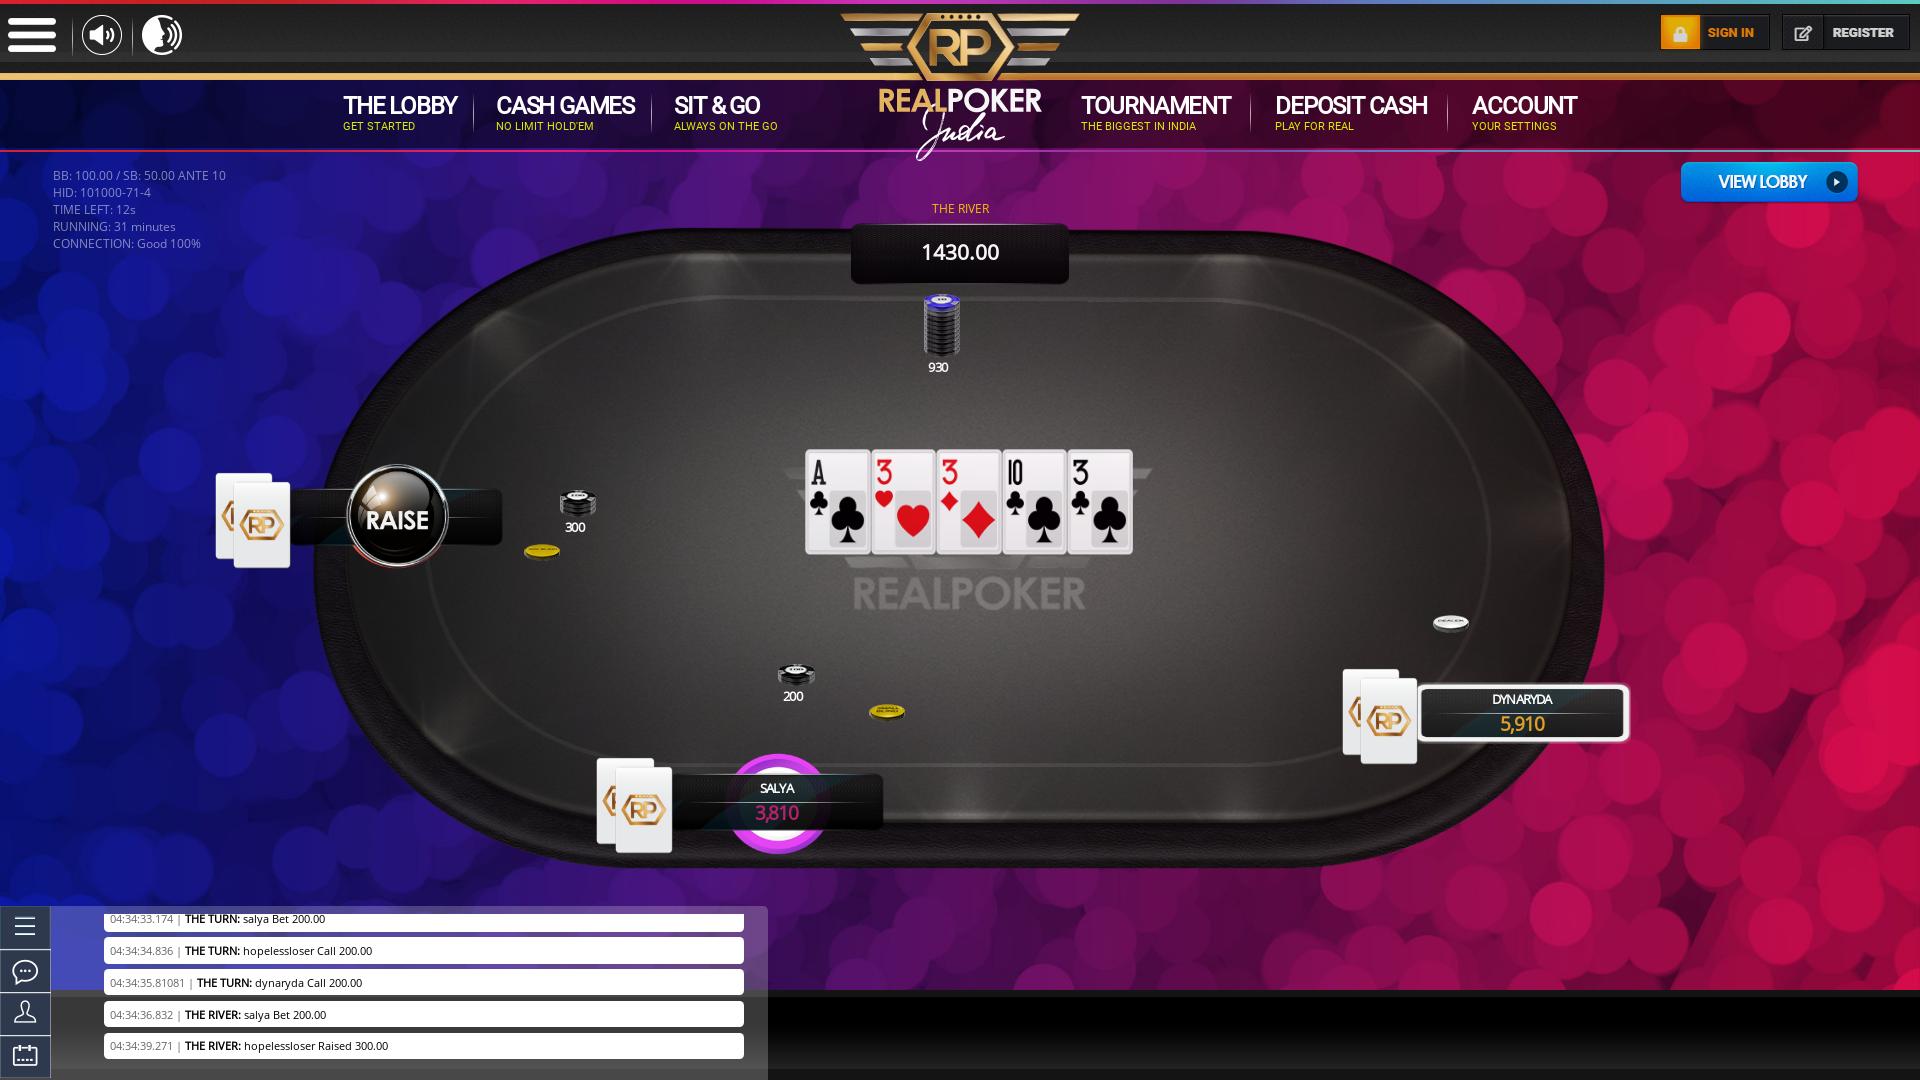 Online poker on a 10 player table in the 31st minute match up